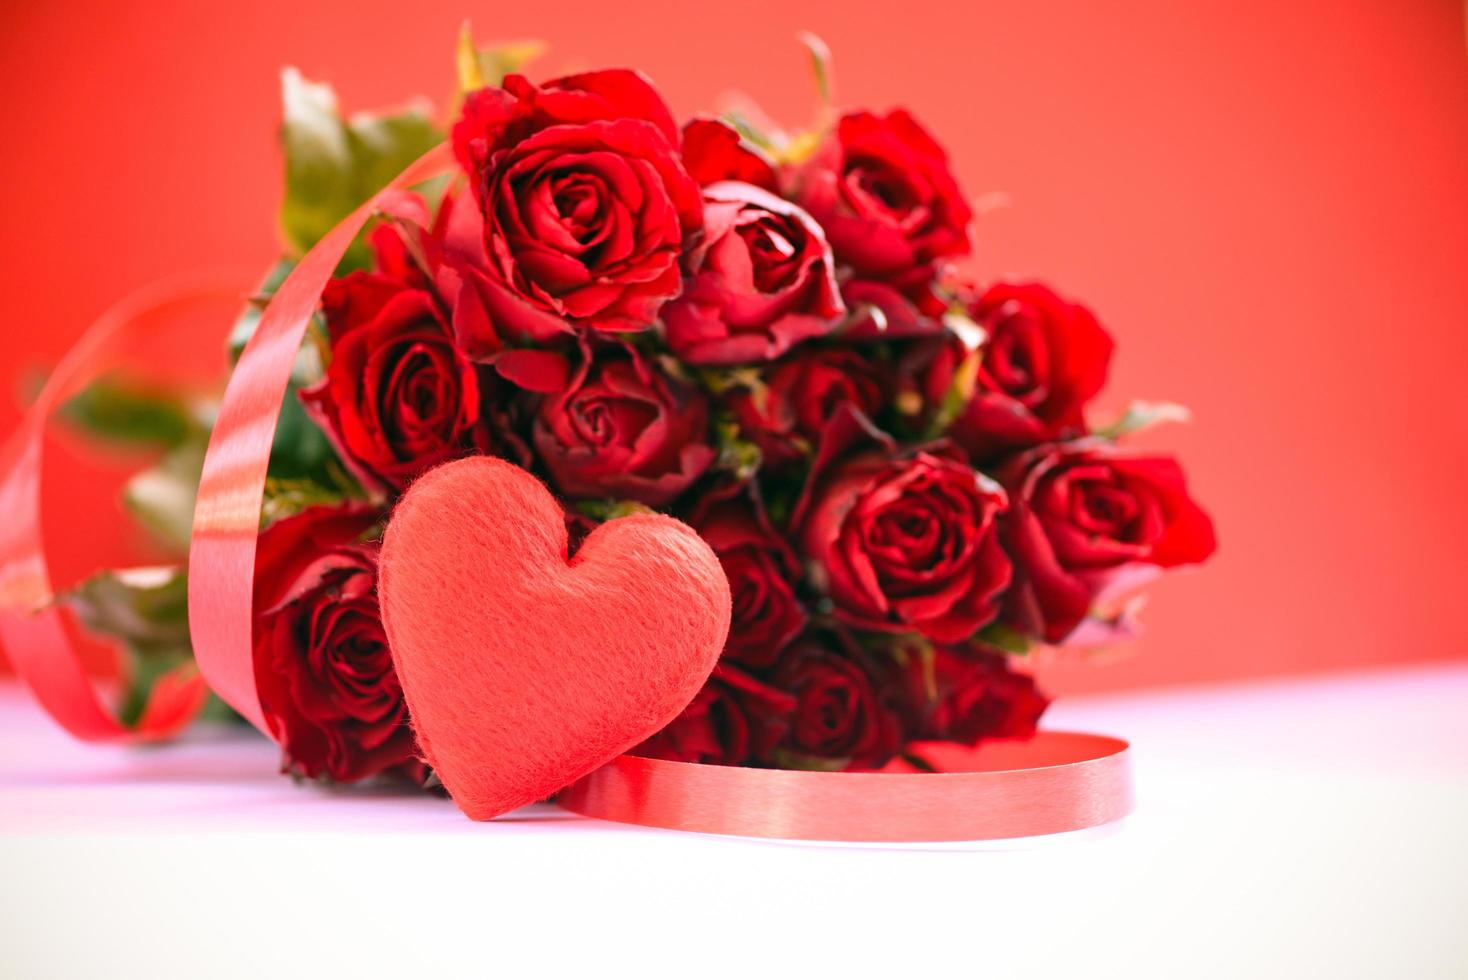 Flower roses bouquet on red background - Red heart with ribbon and rose romantic love valentine day concept photo